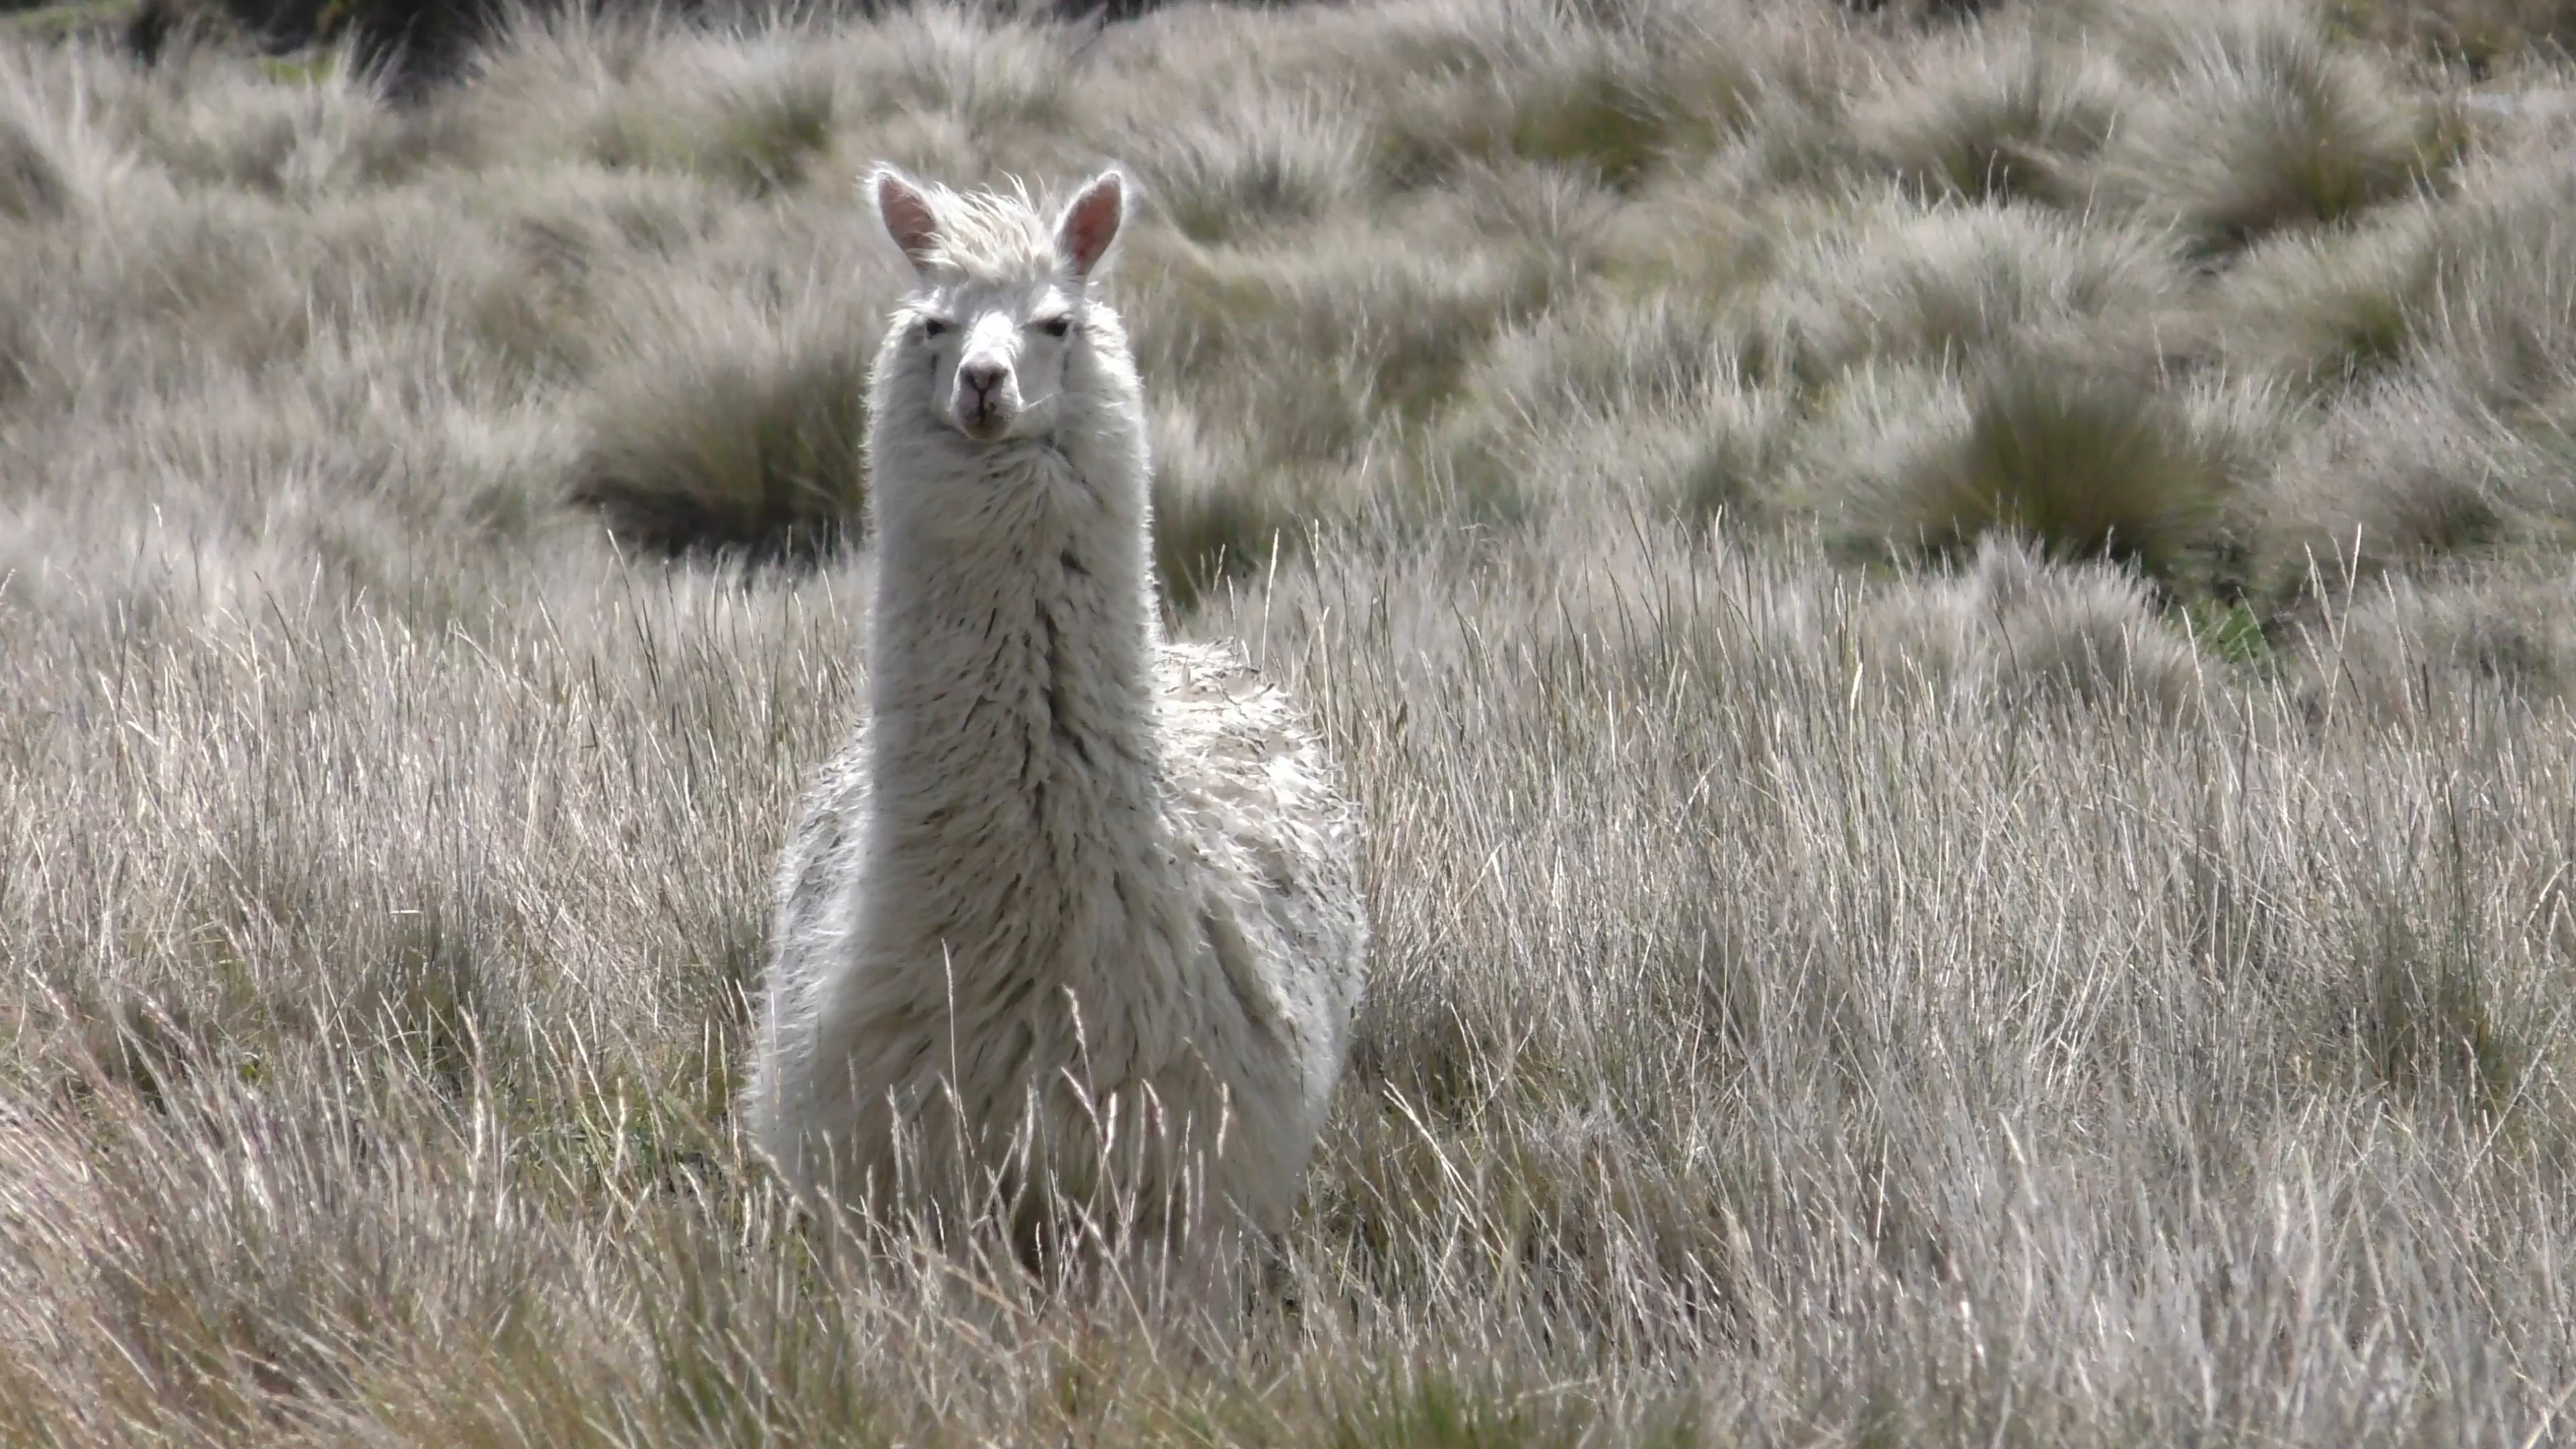 Wild Lama Camelid In Andes Highlands Staring At Camera, Slow Motion ...